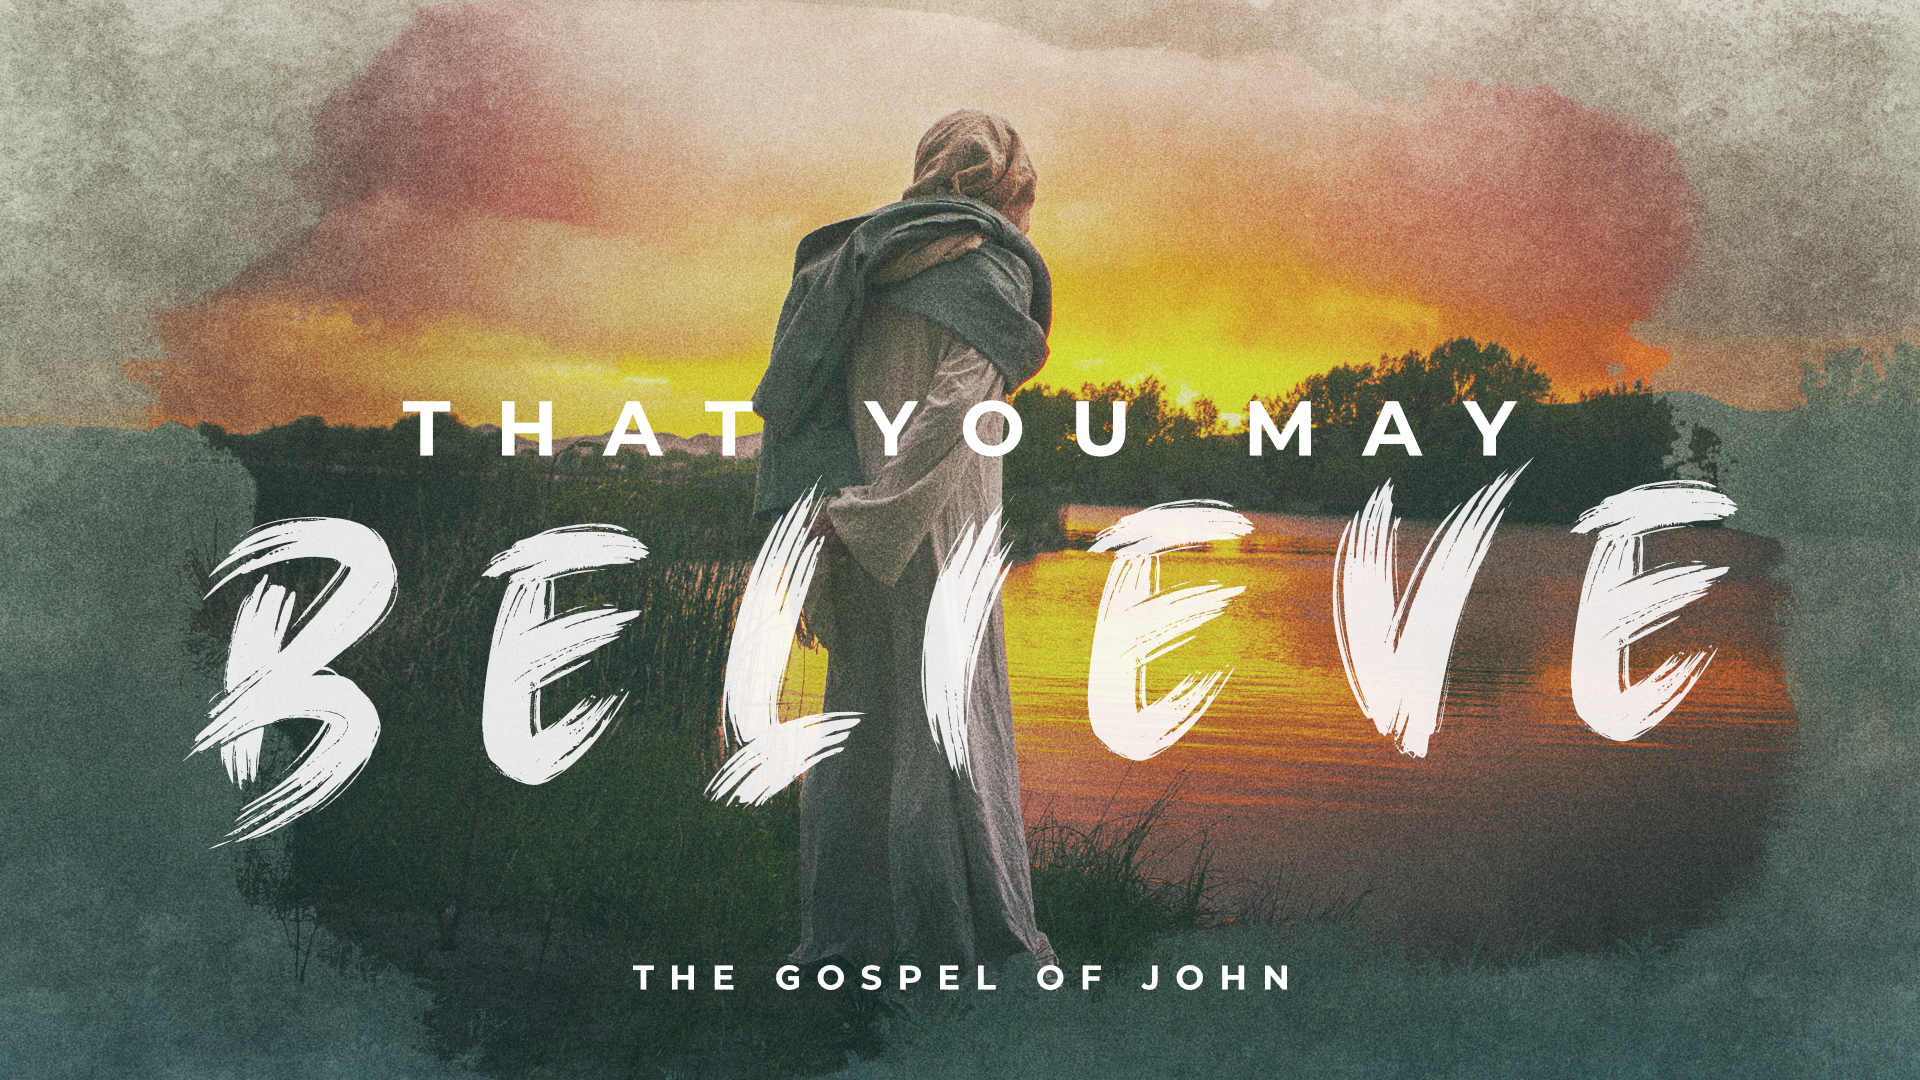 January 8th, 2023 - That You May Believe - Week 59